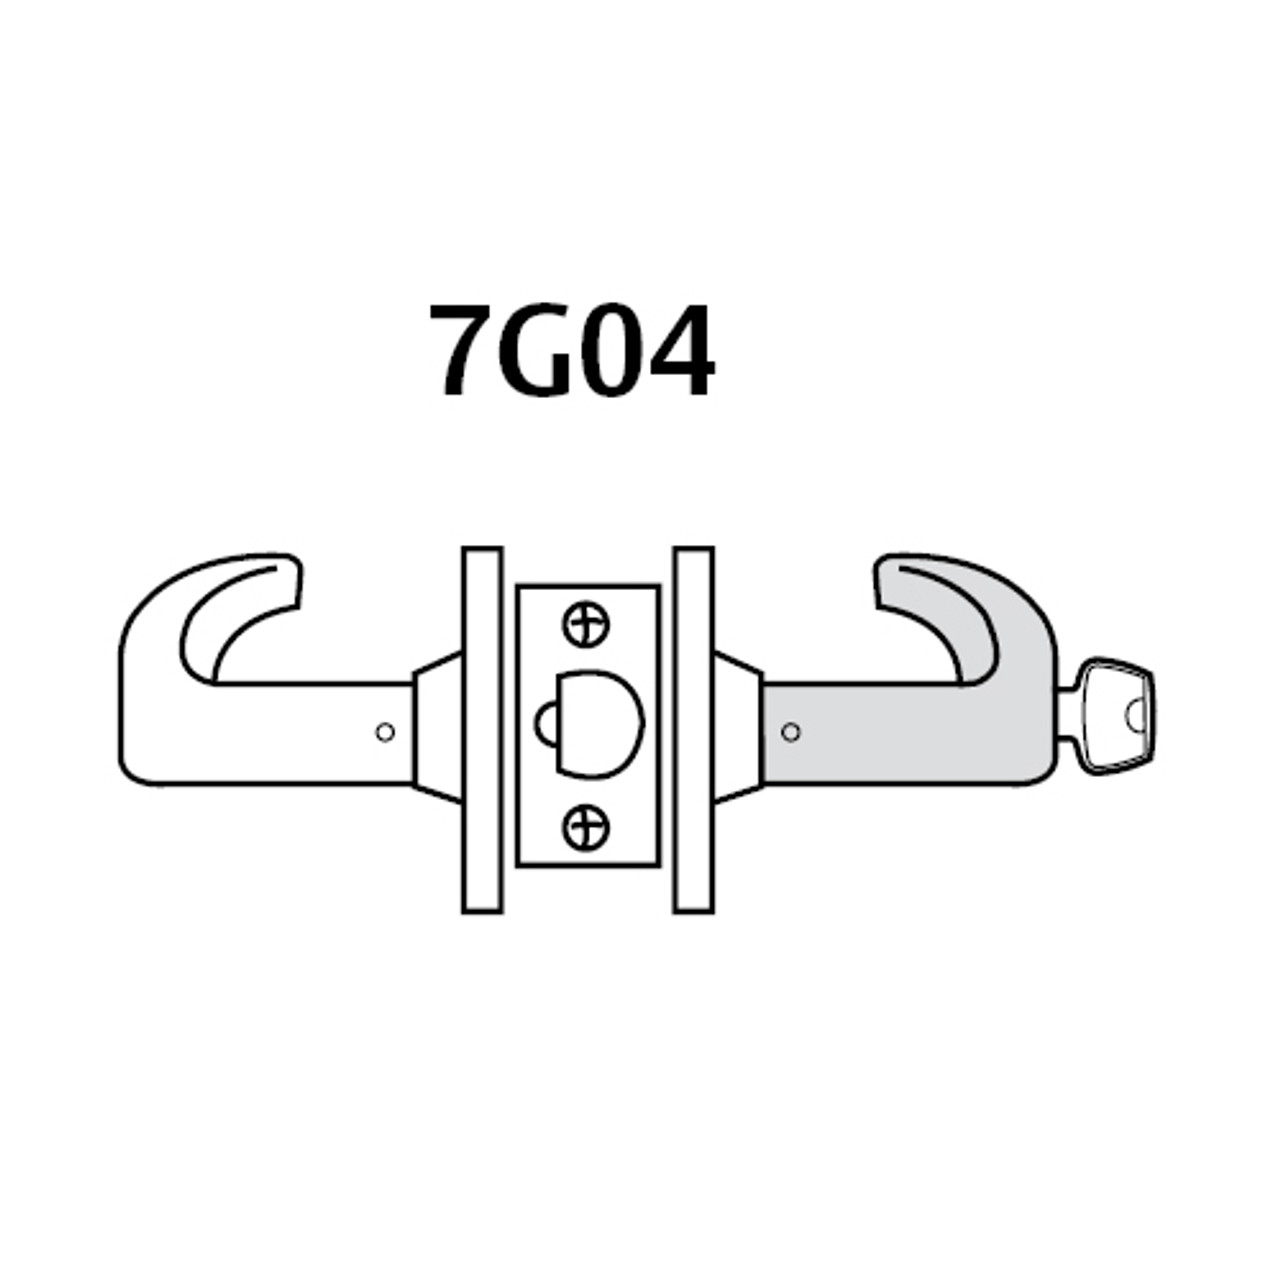 2870-7G04-LP-10B Sargent 7 Line Cylindrical Storeroom/Closet Locks with P Lever Design and L Rose Prepped for SFIC in Oxidized Dull Bronze